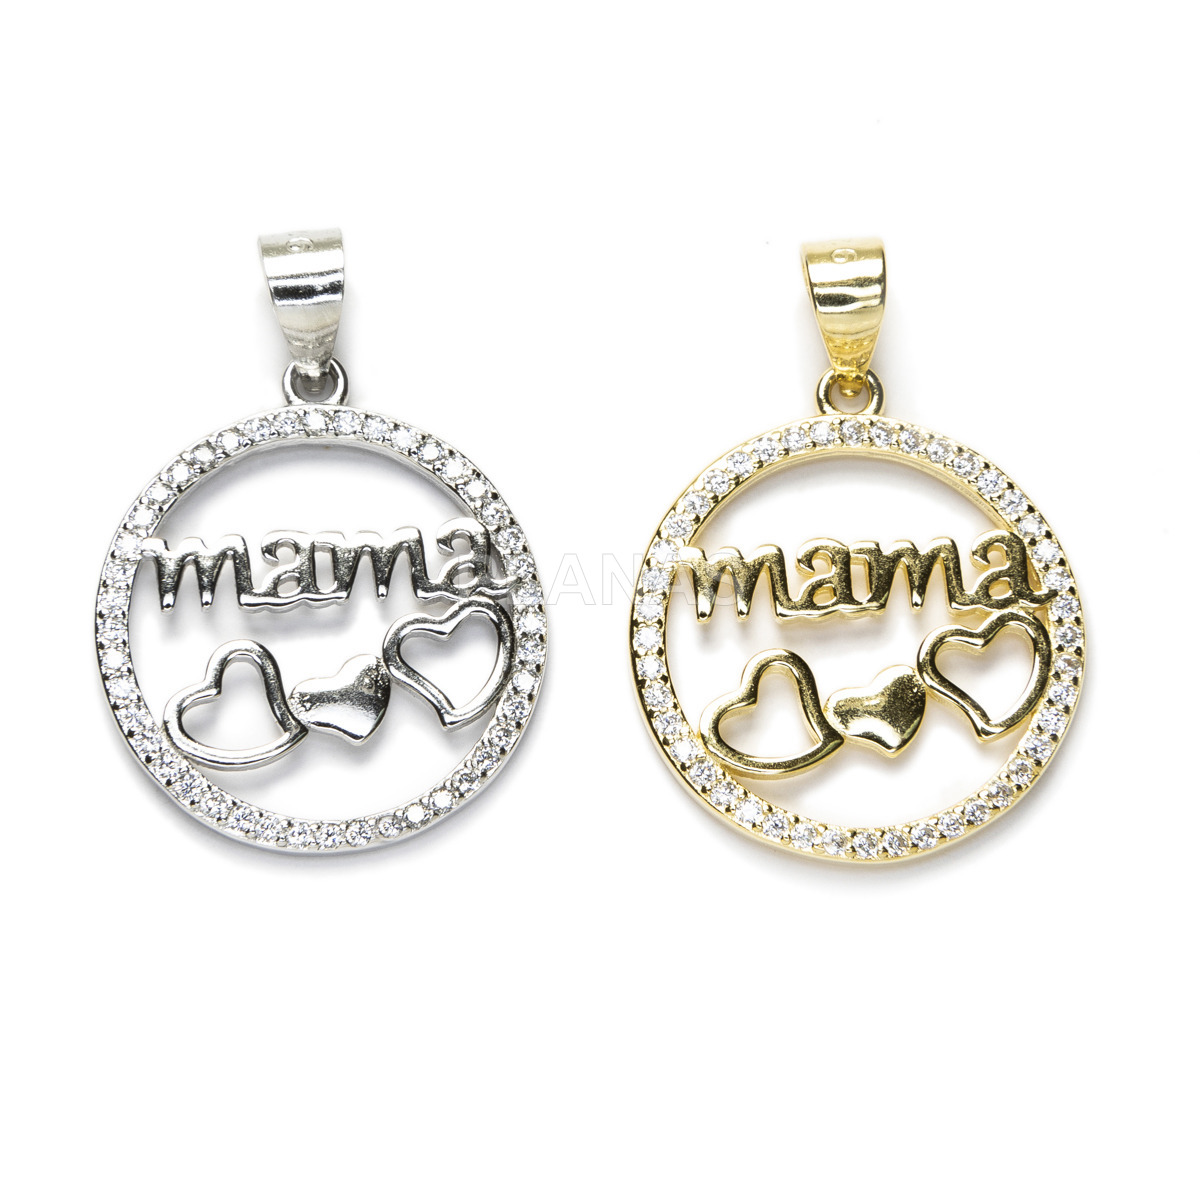 Rhodium-plated sterling silver pendant. mother.